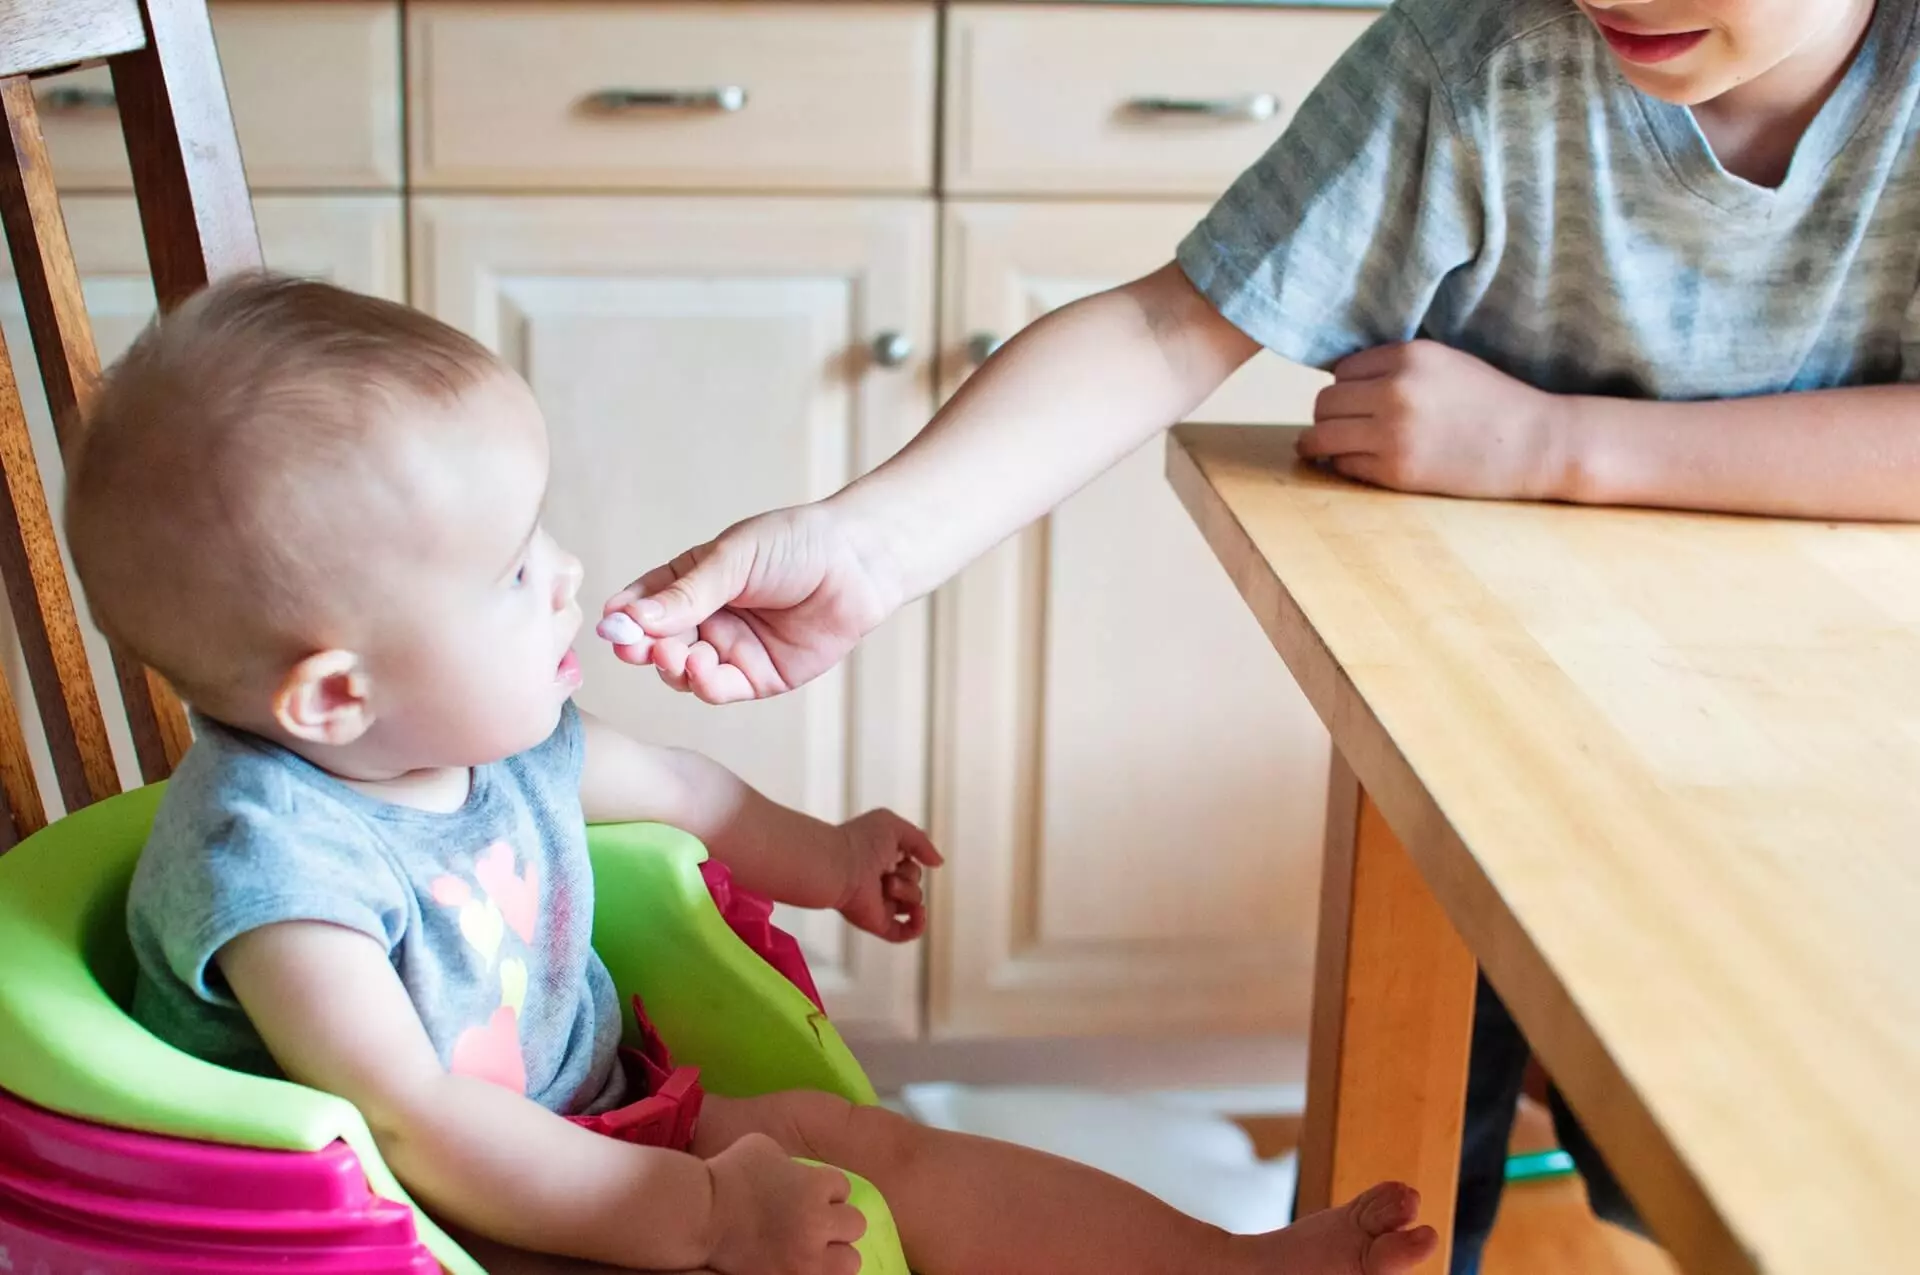 Should I give a four-month-old baby solids?, Health & wellbeing